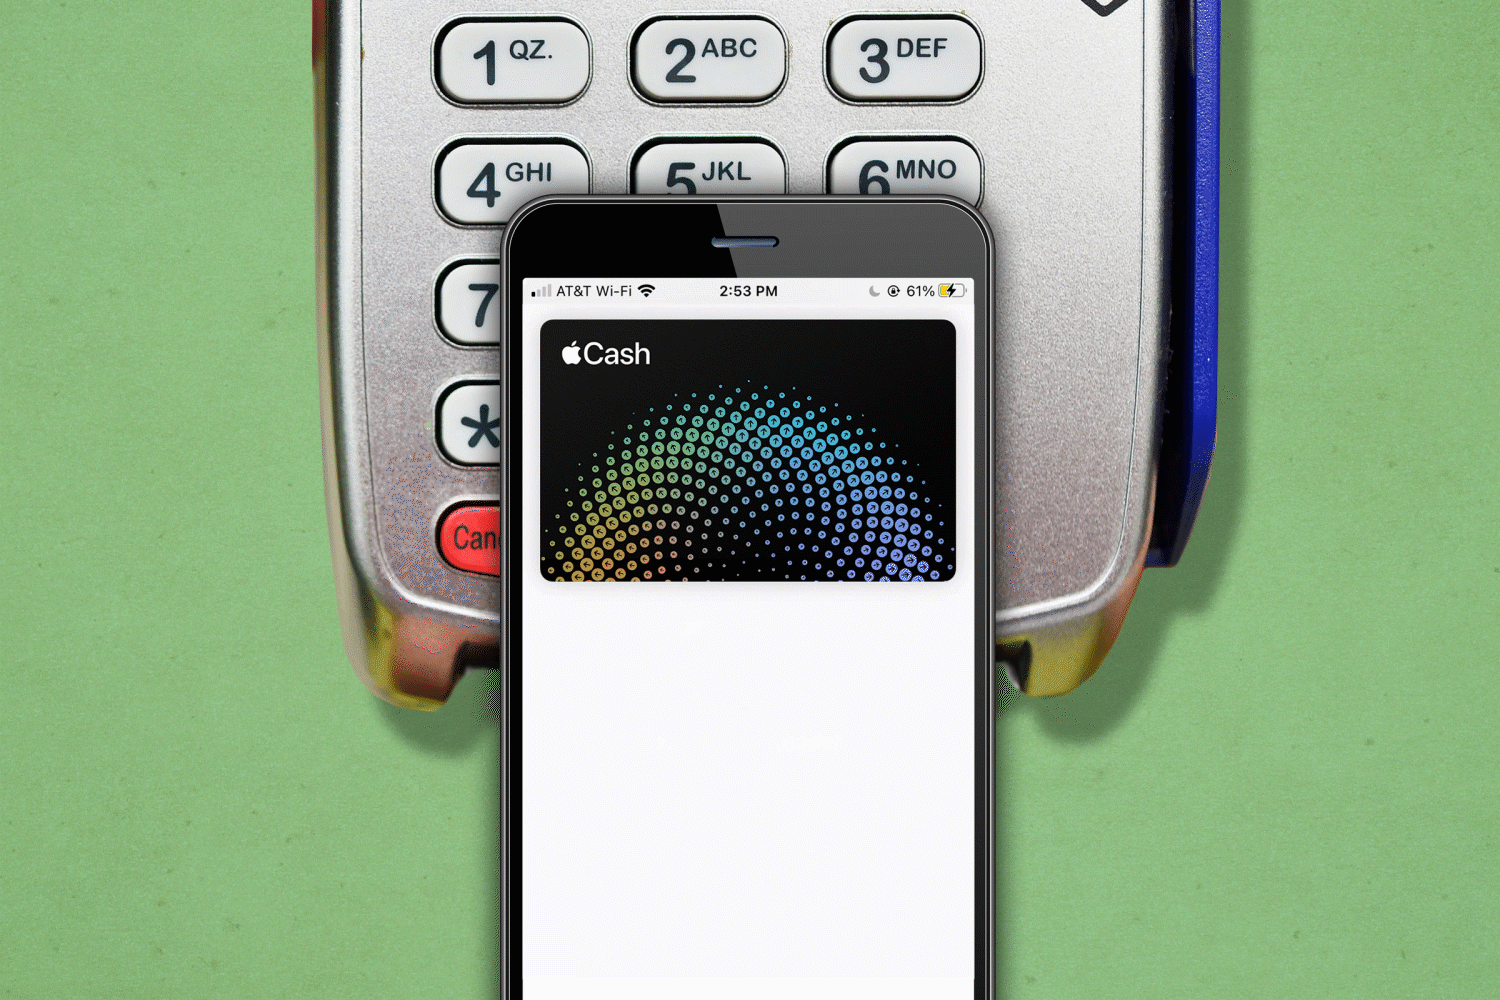 Animated image of iphone using apple pay to complete a transaction